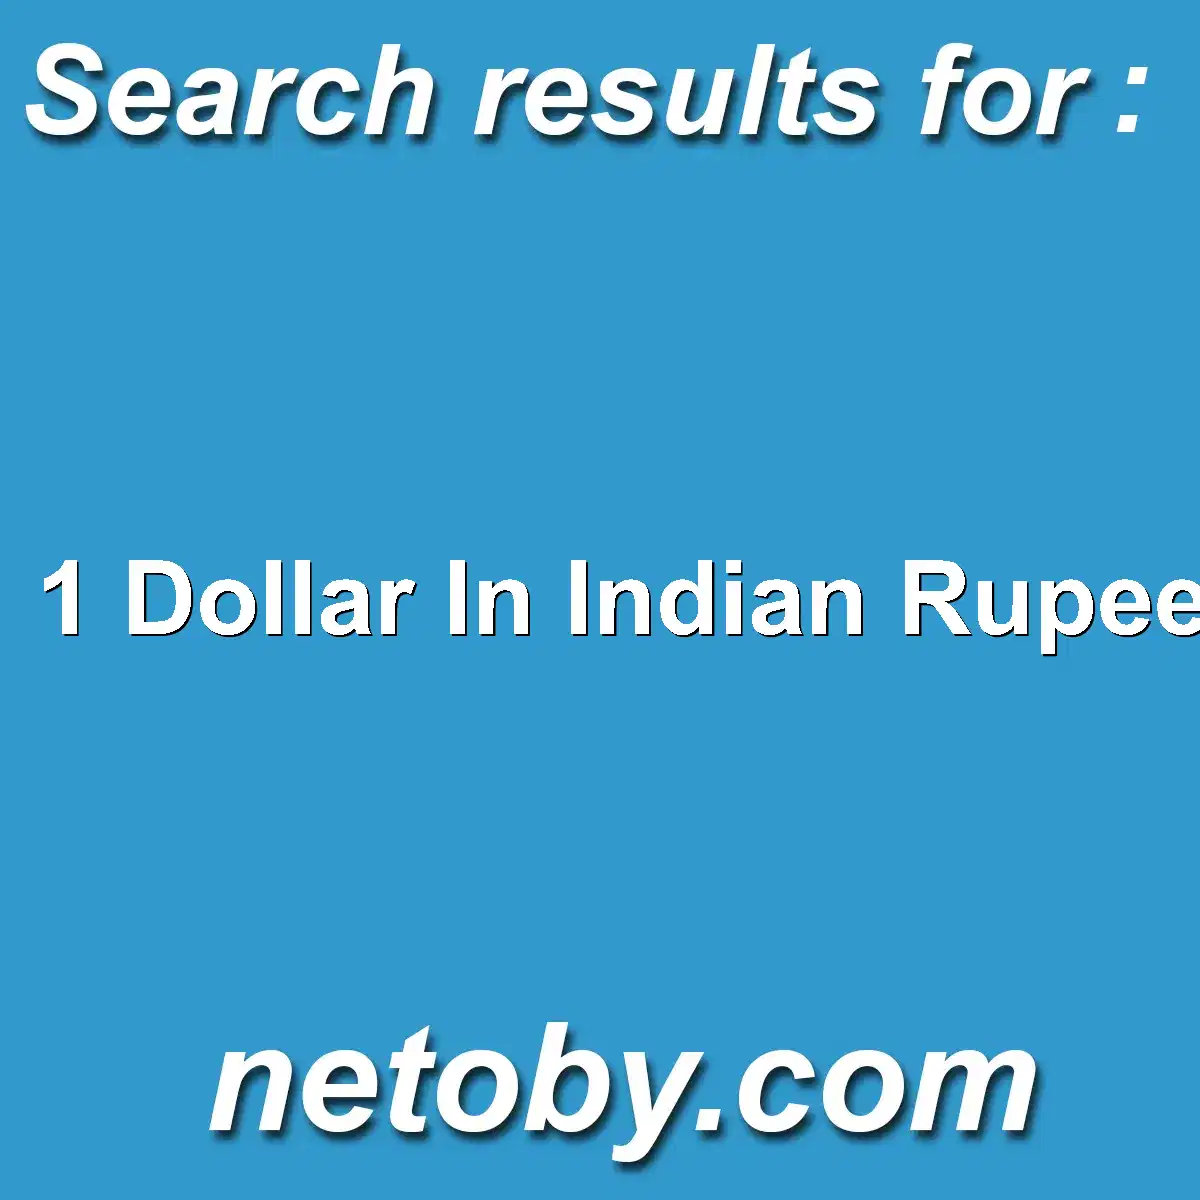 ﻿1 Dollar In Indian Rupees